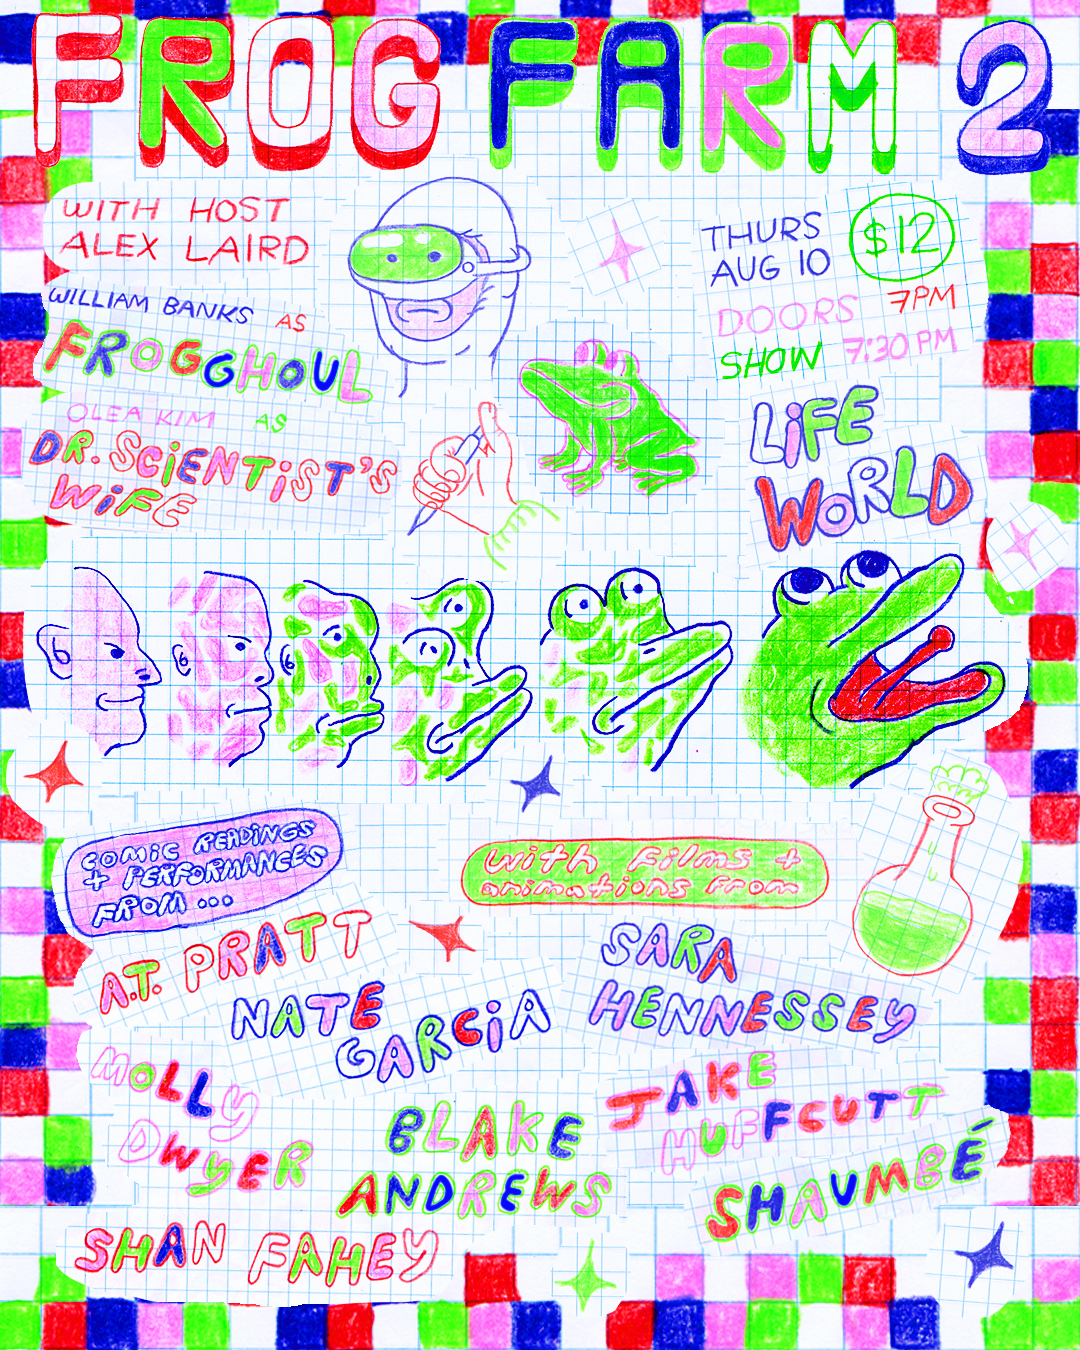 frog farm 2 show poster.png